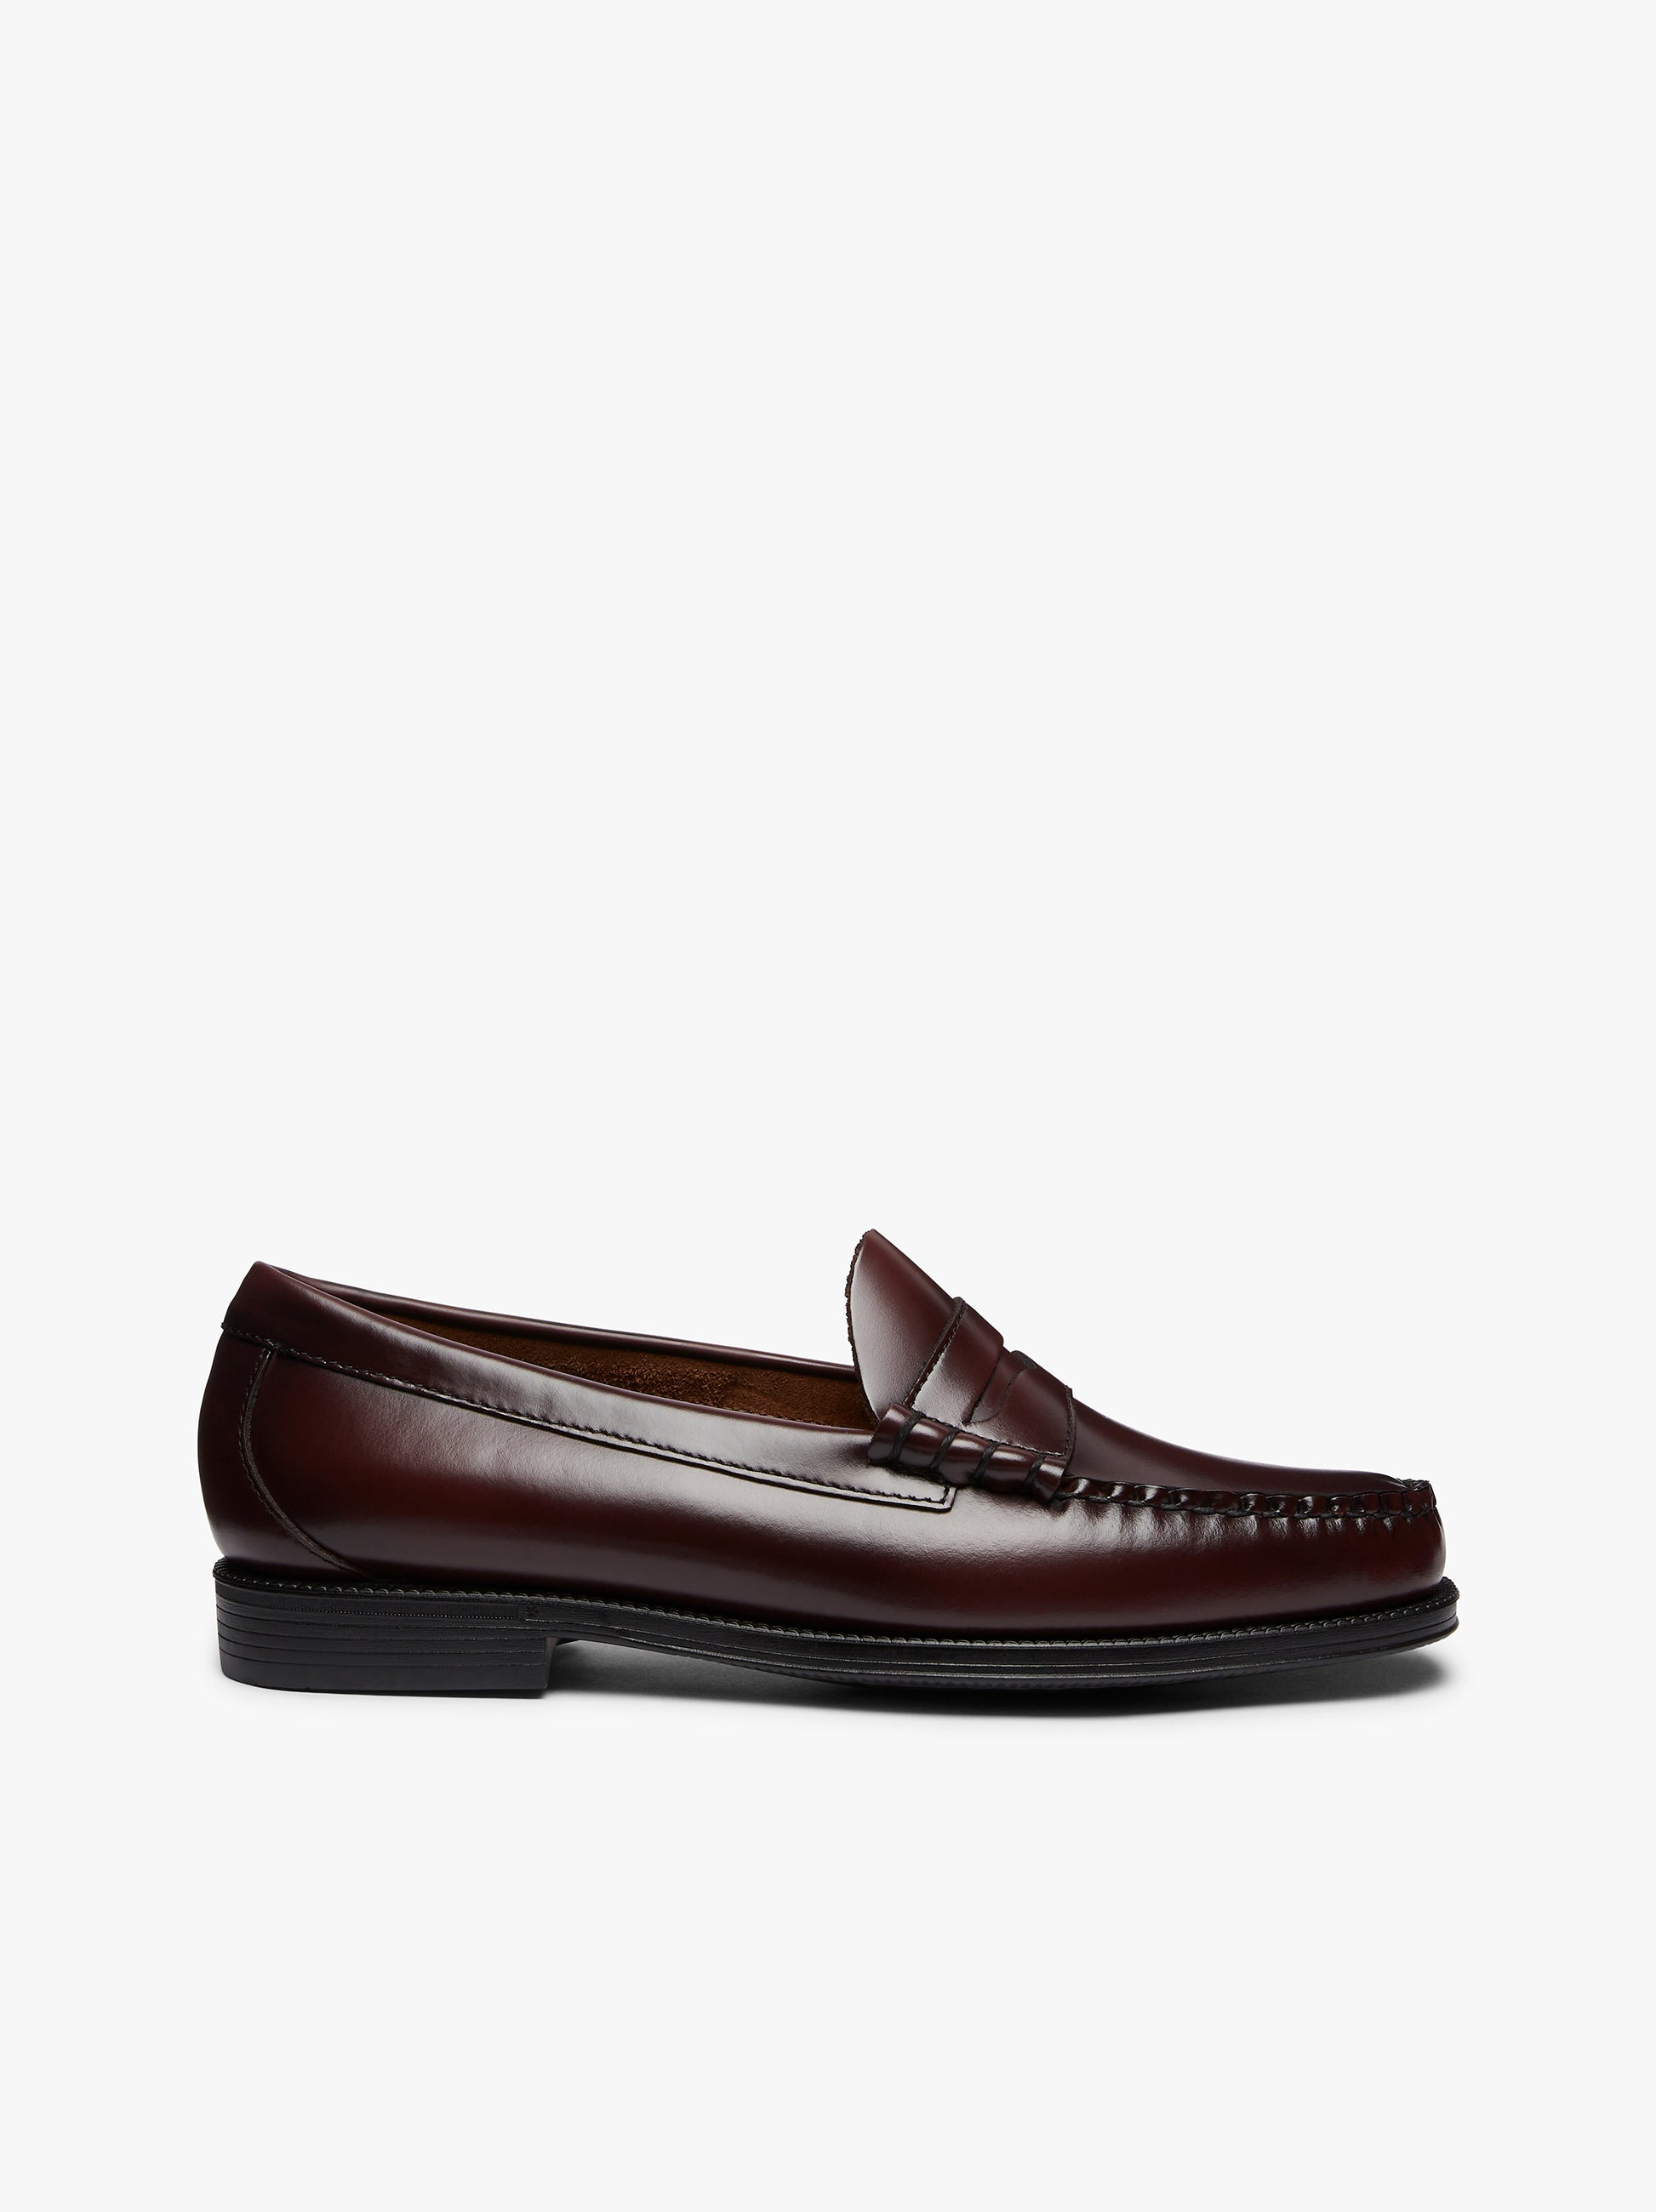 Weejuns Larson Penny Loafers Wine Leather | Wine Red Loafers Mens – G.H ...